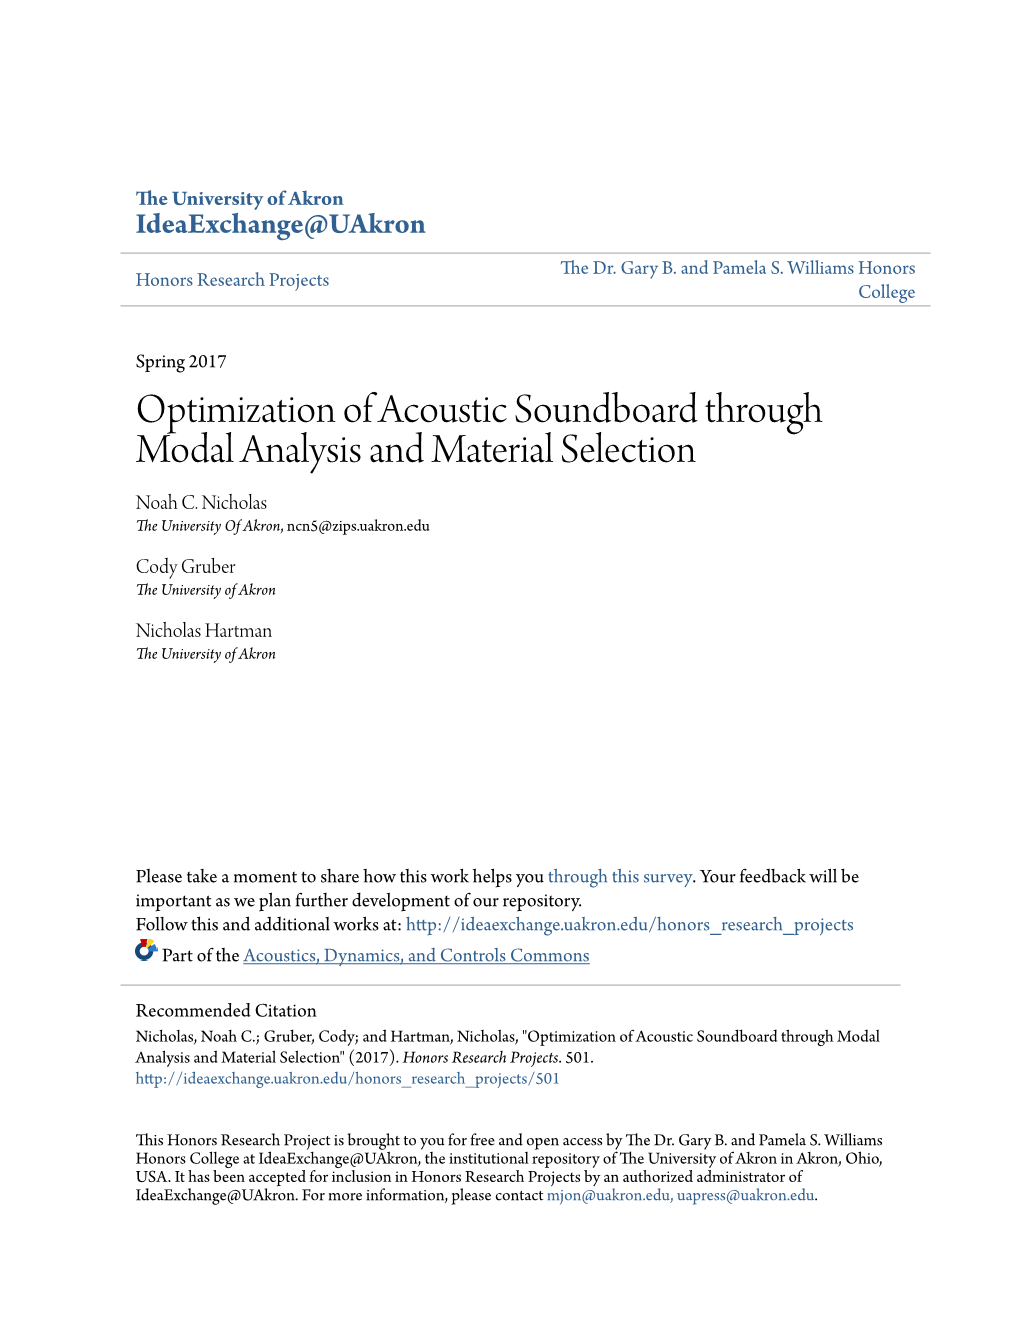 Optimization of Acoustic Soundboard Through Modal Analysis and Material Selection Noah C